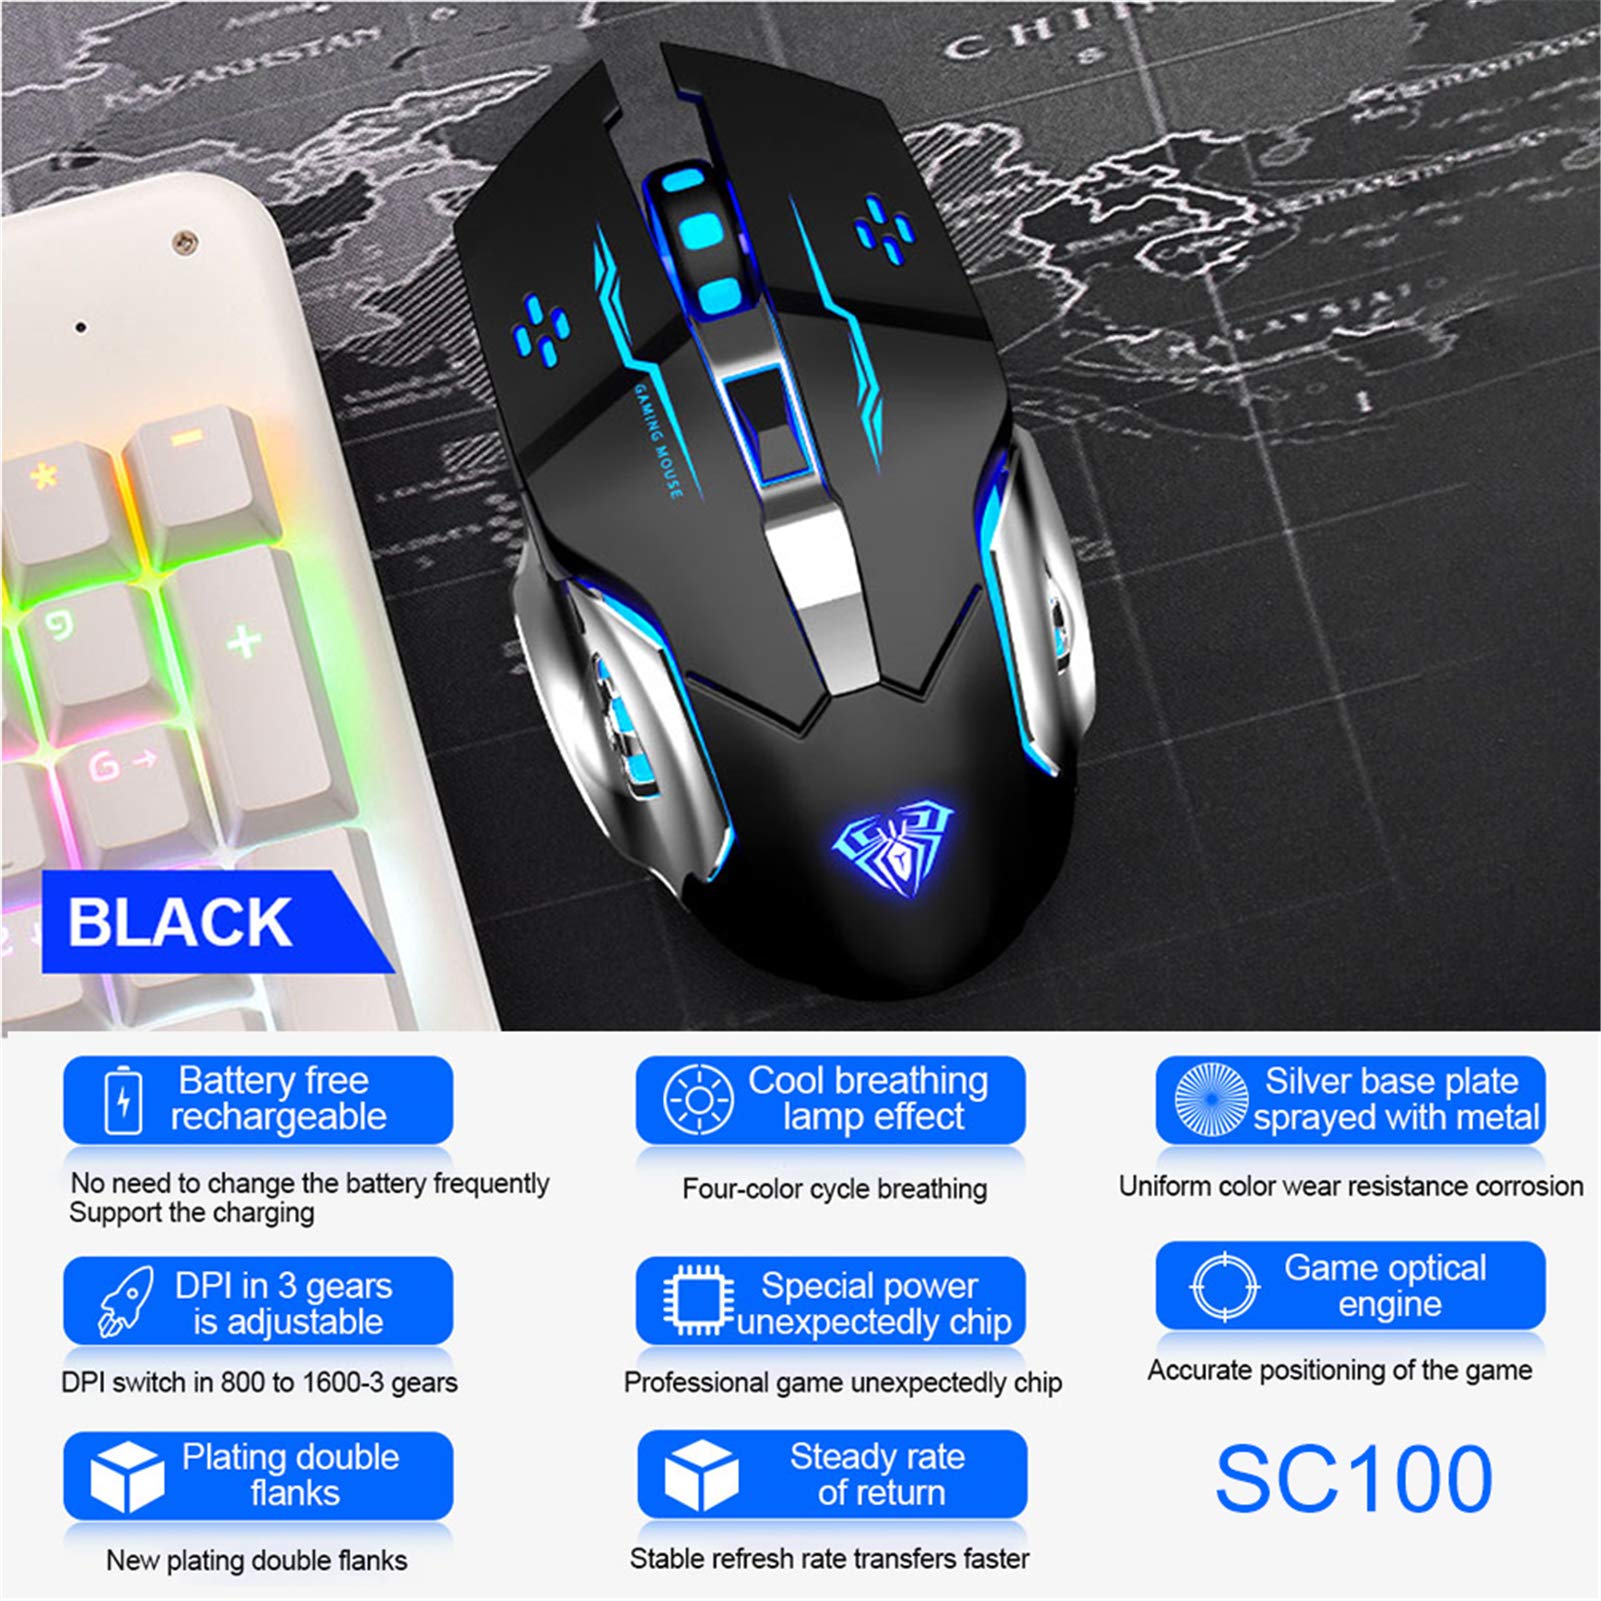 AULA Punk Black Gaming Keyboard and Mouse Combo (F2088 Wired Blue Switches Mechanical Keyboard + SC100 Black Wireless Gaming Mouse)